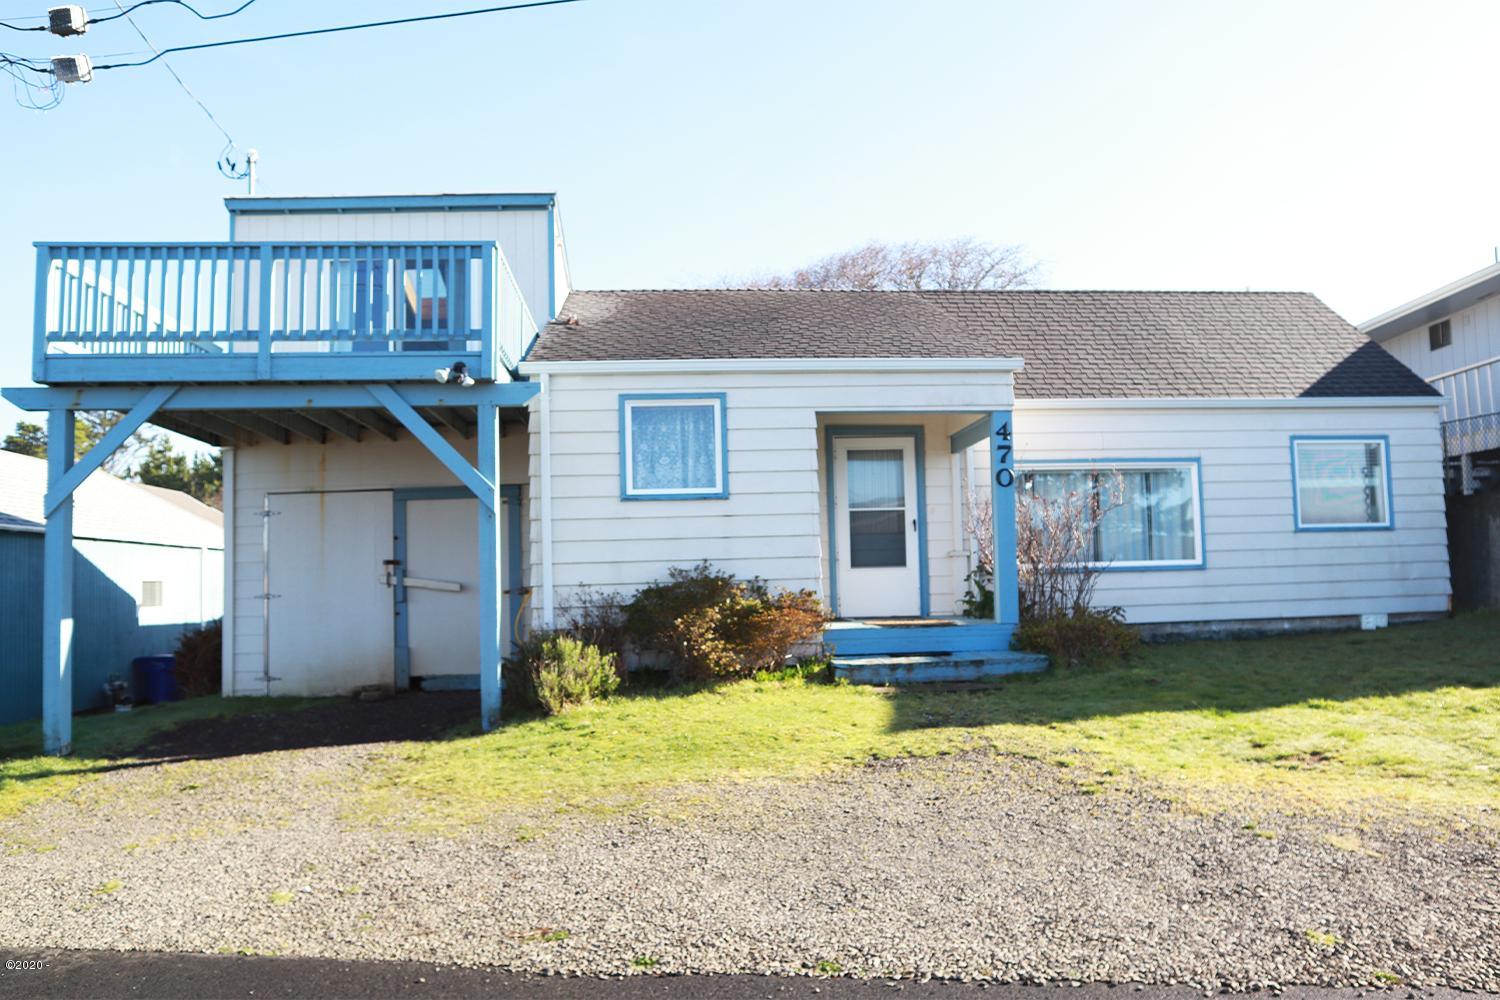 470 SW Coast Ave Depoe Bay, Gleneden Beach, Lincoln City, Newport, Otis, Rose Lodge, Seal Rock, Waldport, Yachats, To Home Listings - Amy Plechaty, Emerald Coast Realty Real Estate, homes for sale, property for sale